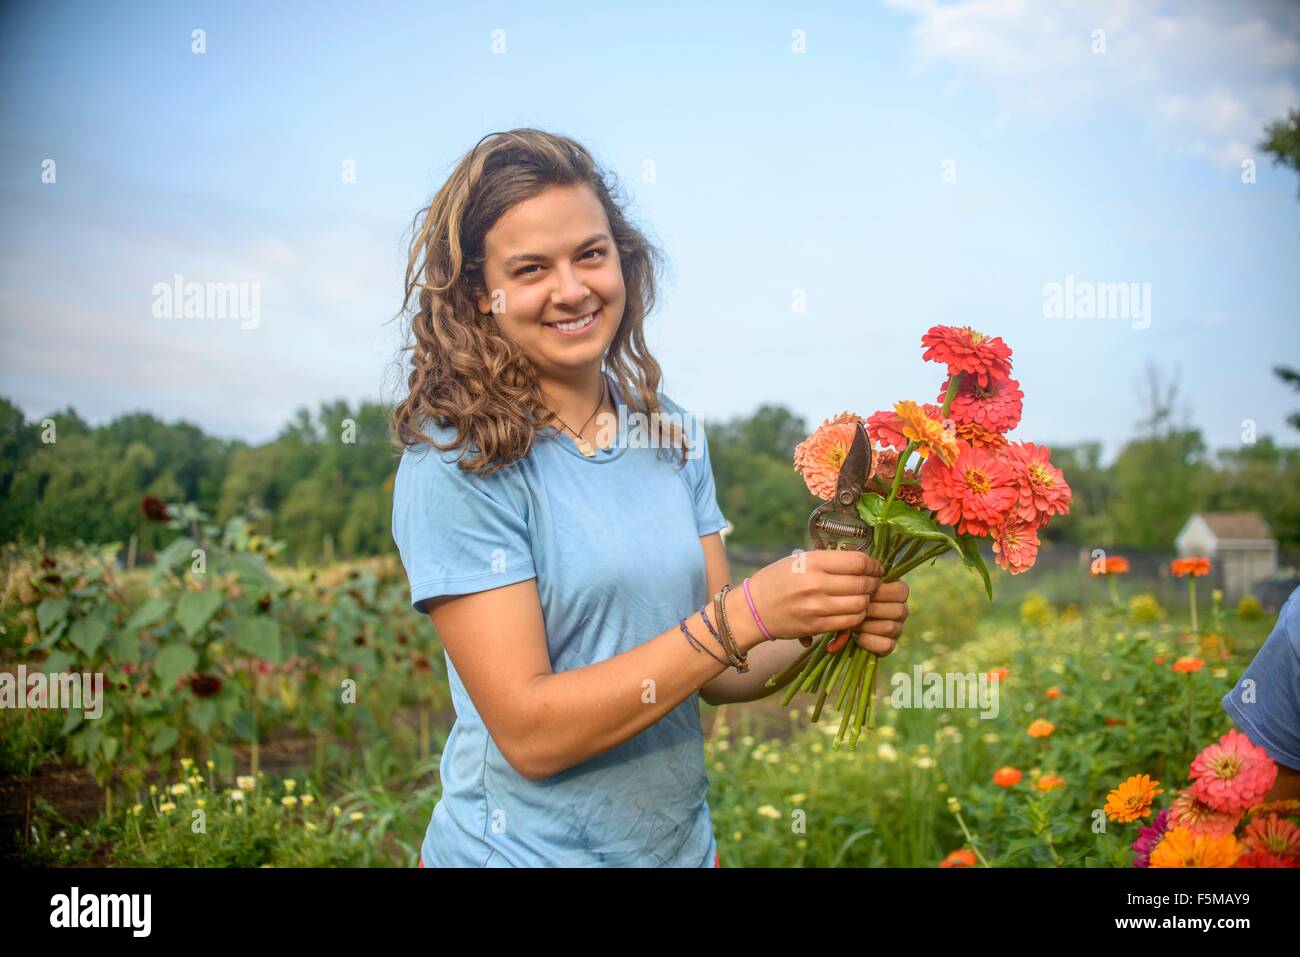 Portrait of female farm worker holding a bunch of fresh cut flowers Stock Photo